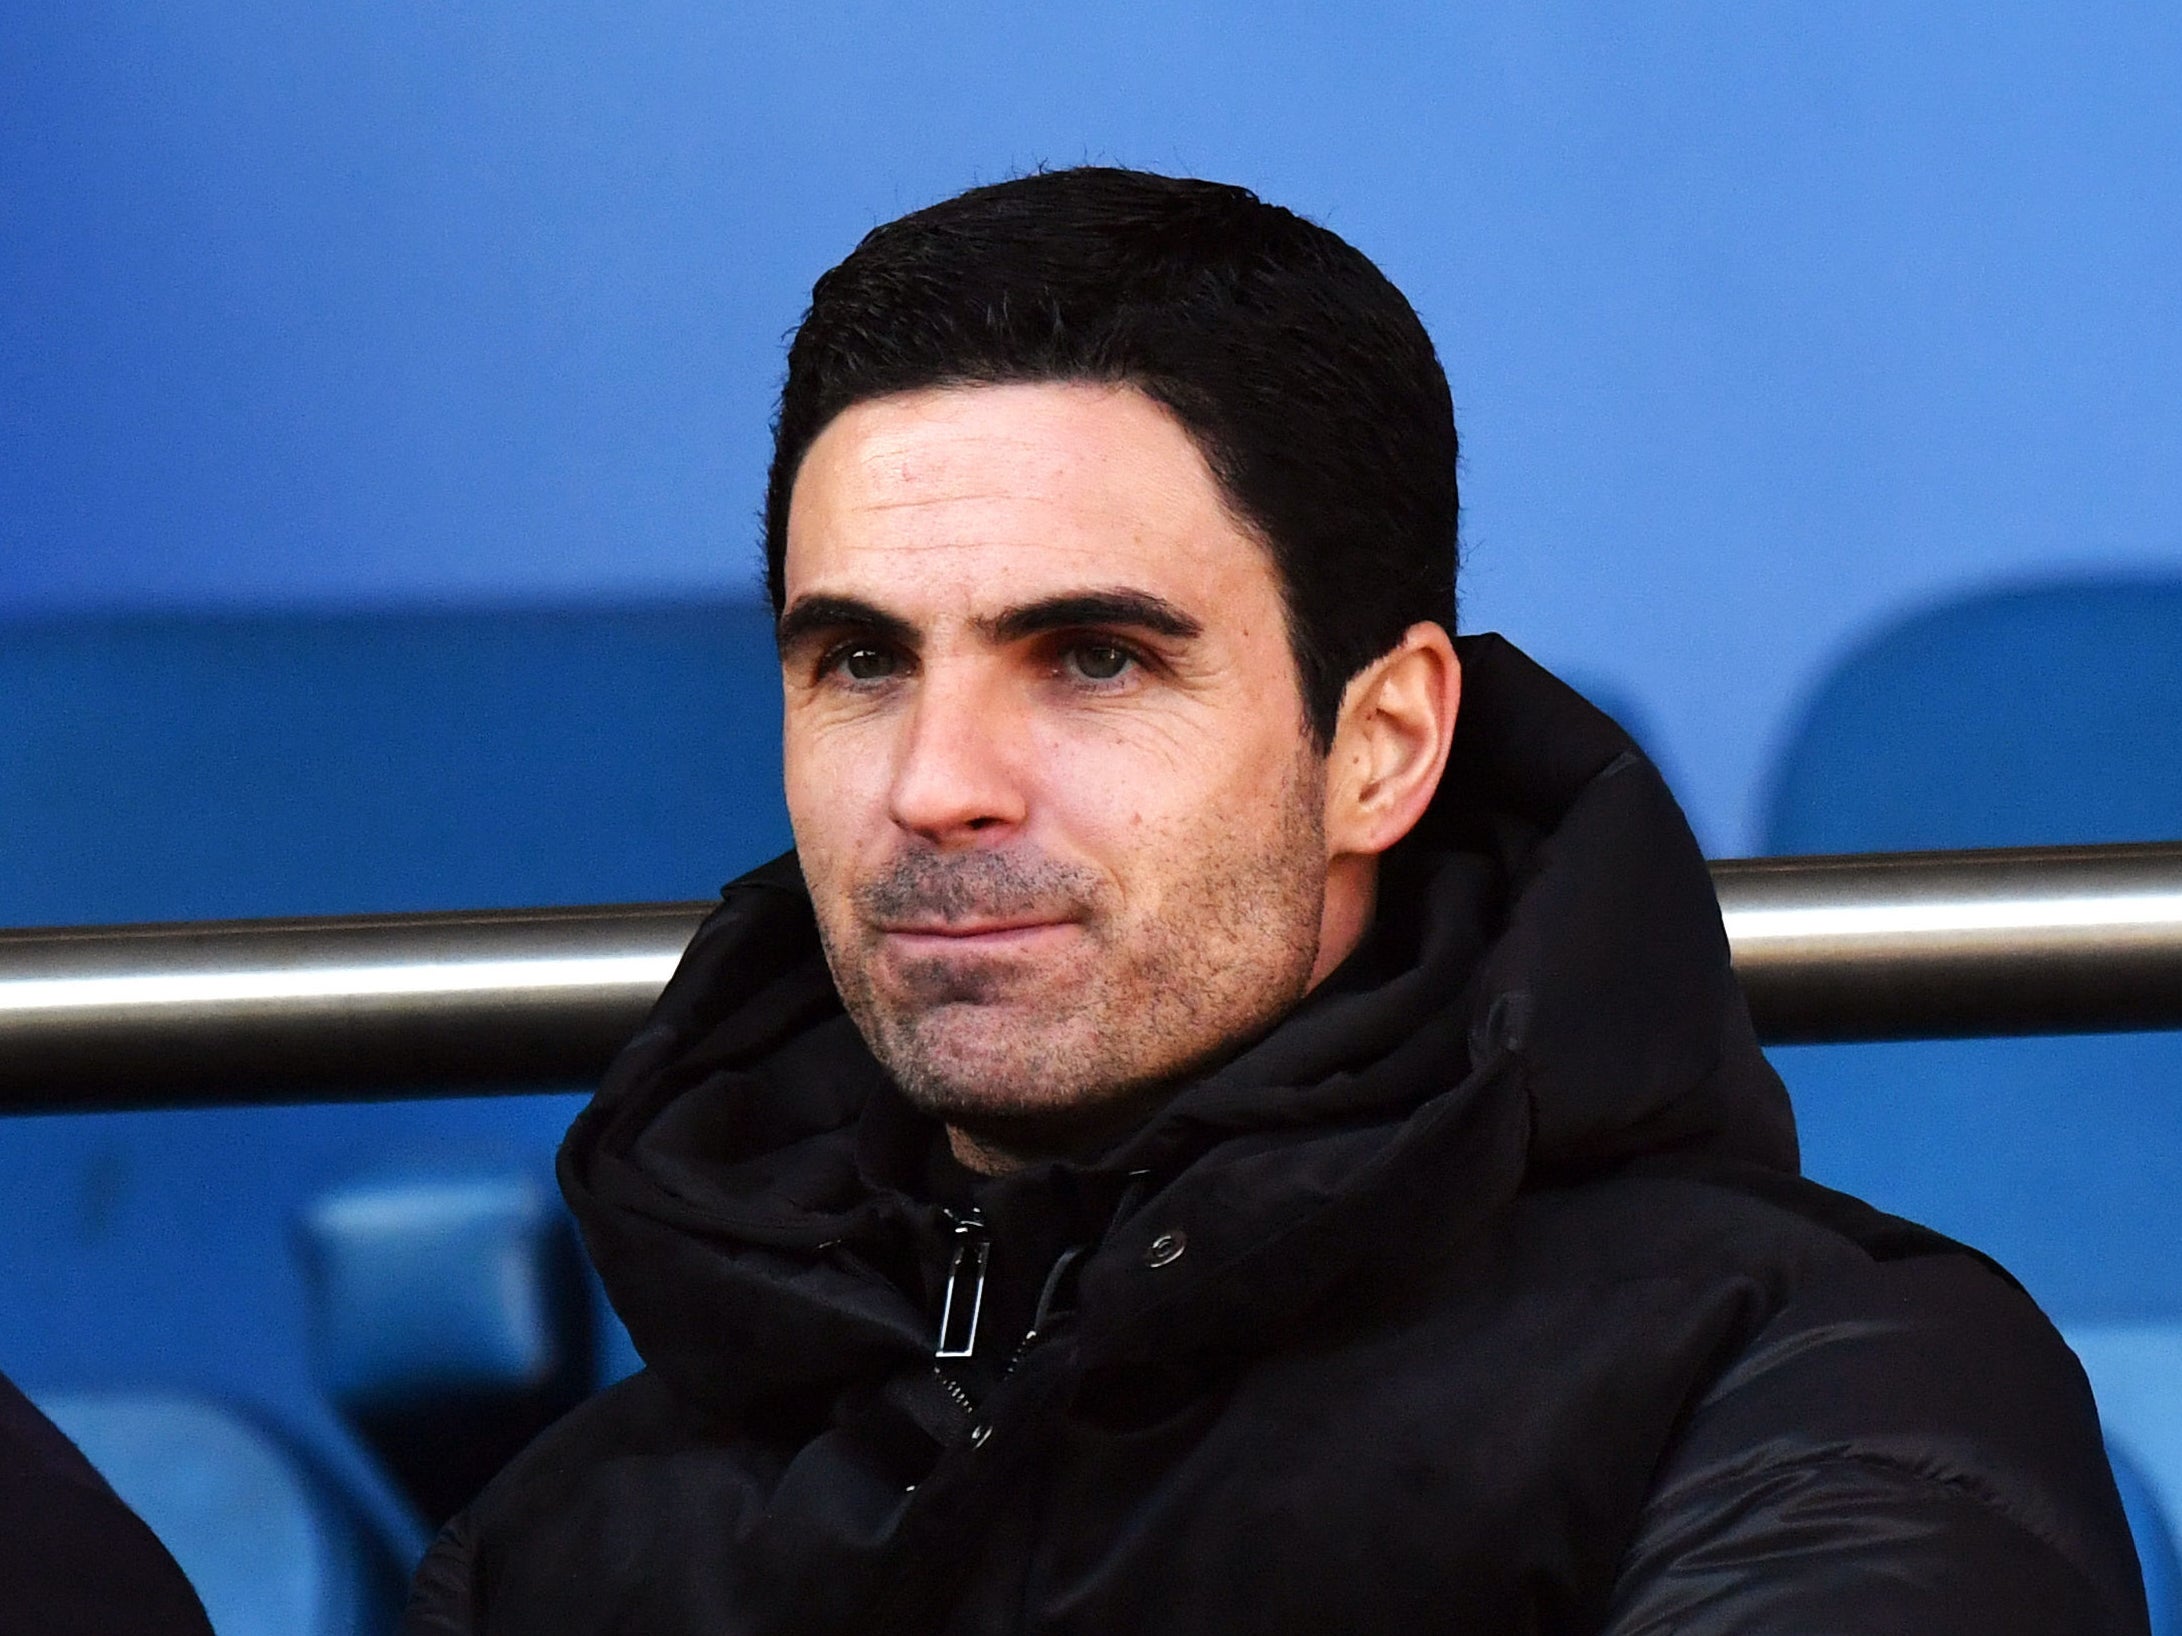 Mikel Arteta will be in the dugout for the first time